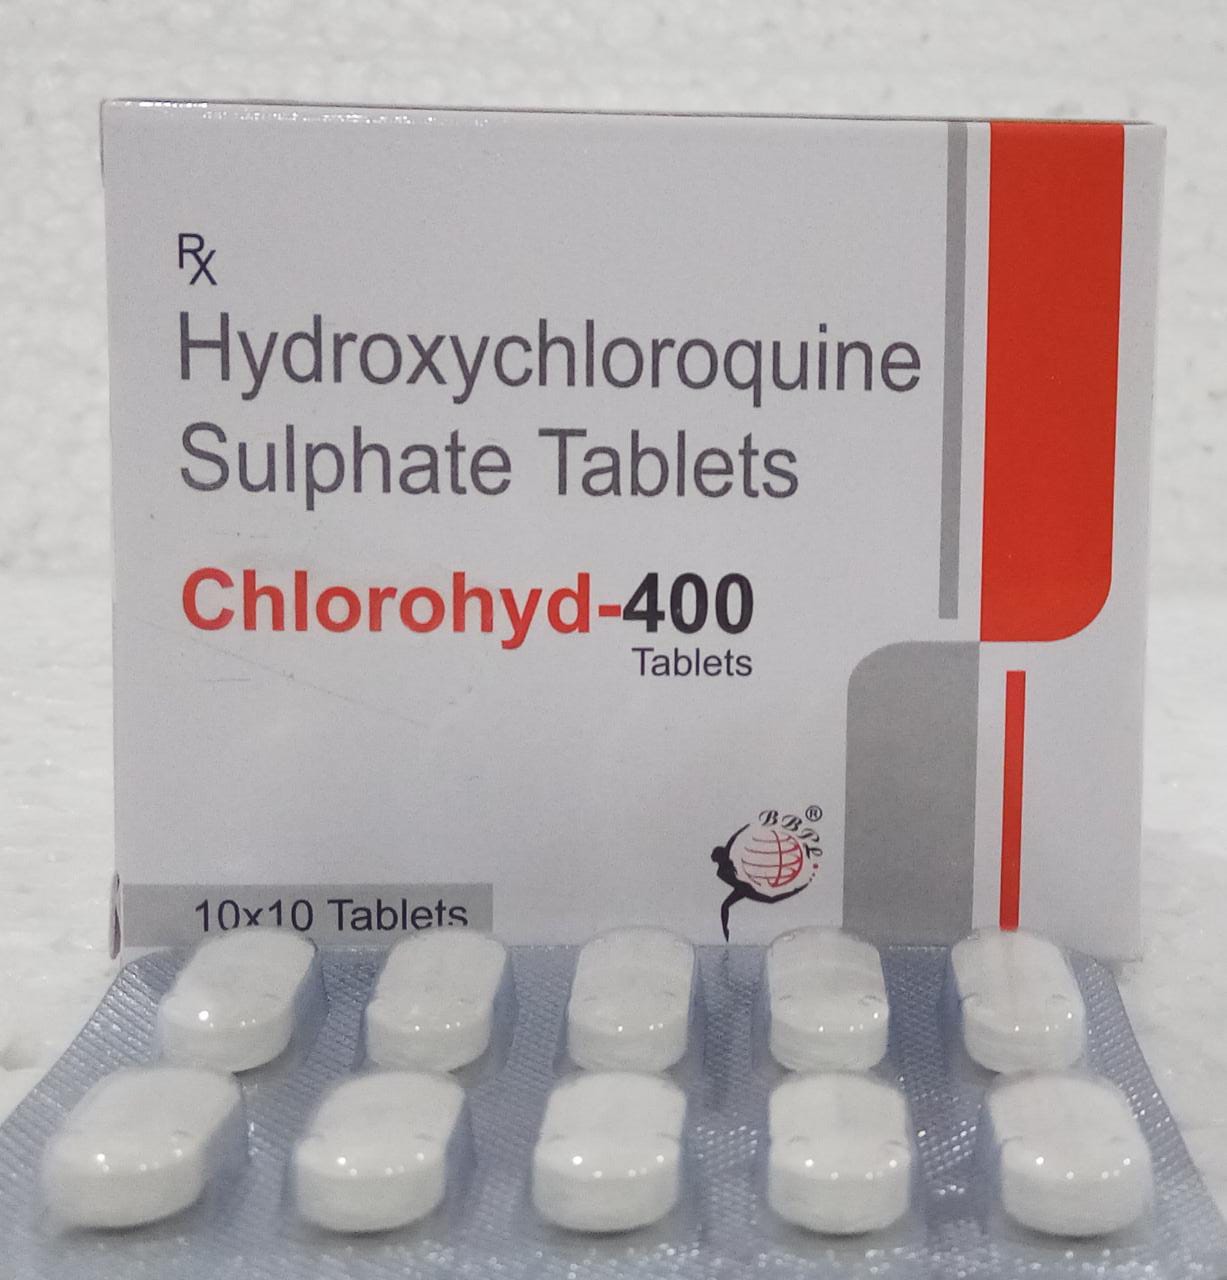 Product Name: CHLOROHYD 400, Compositions of CHLOROHYD 400 are Hydroxychloroquine Sulphate Tablets - Biomax Biotechnics Pvt. Ltd